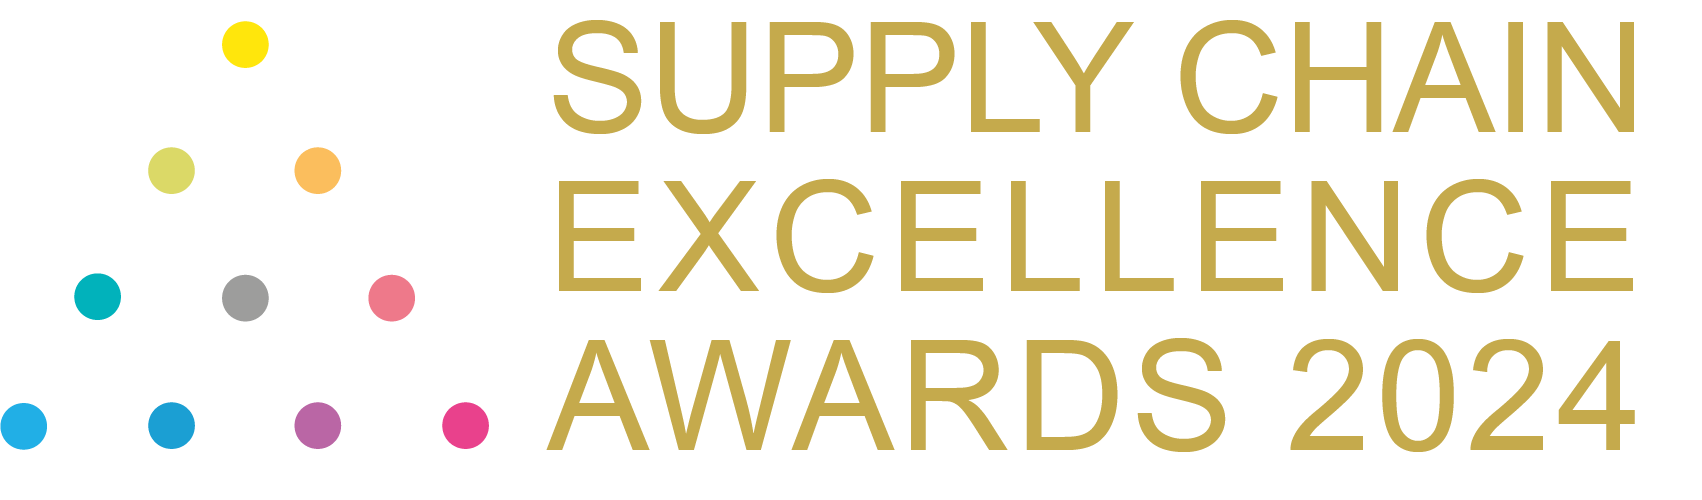 Supply Chain Excellence Awards 2024